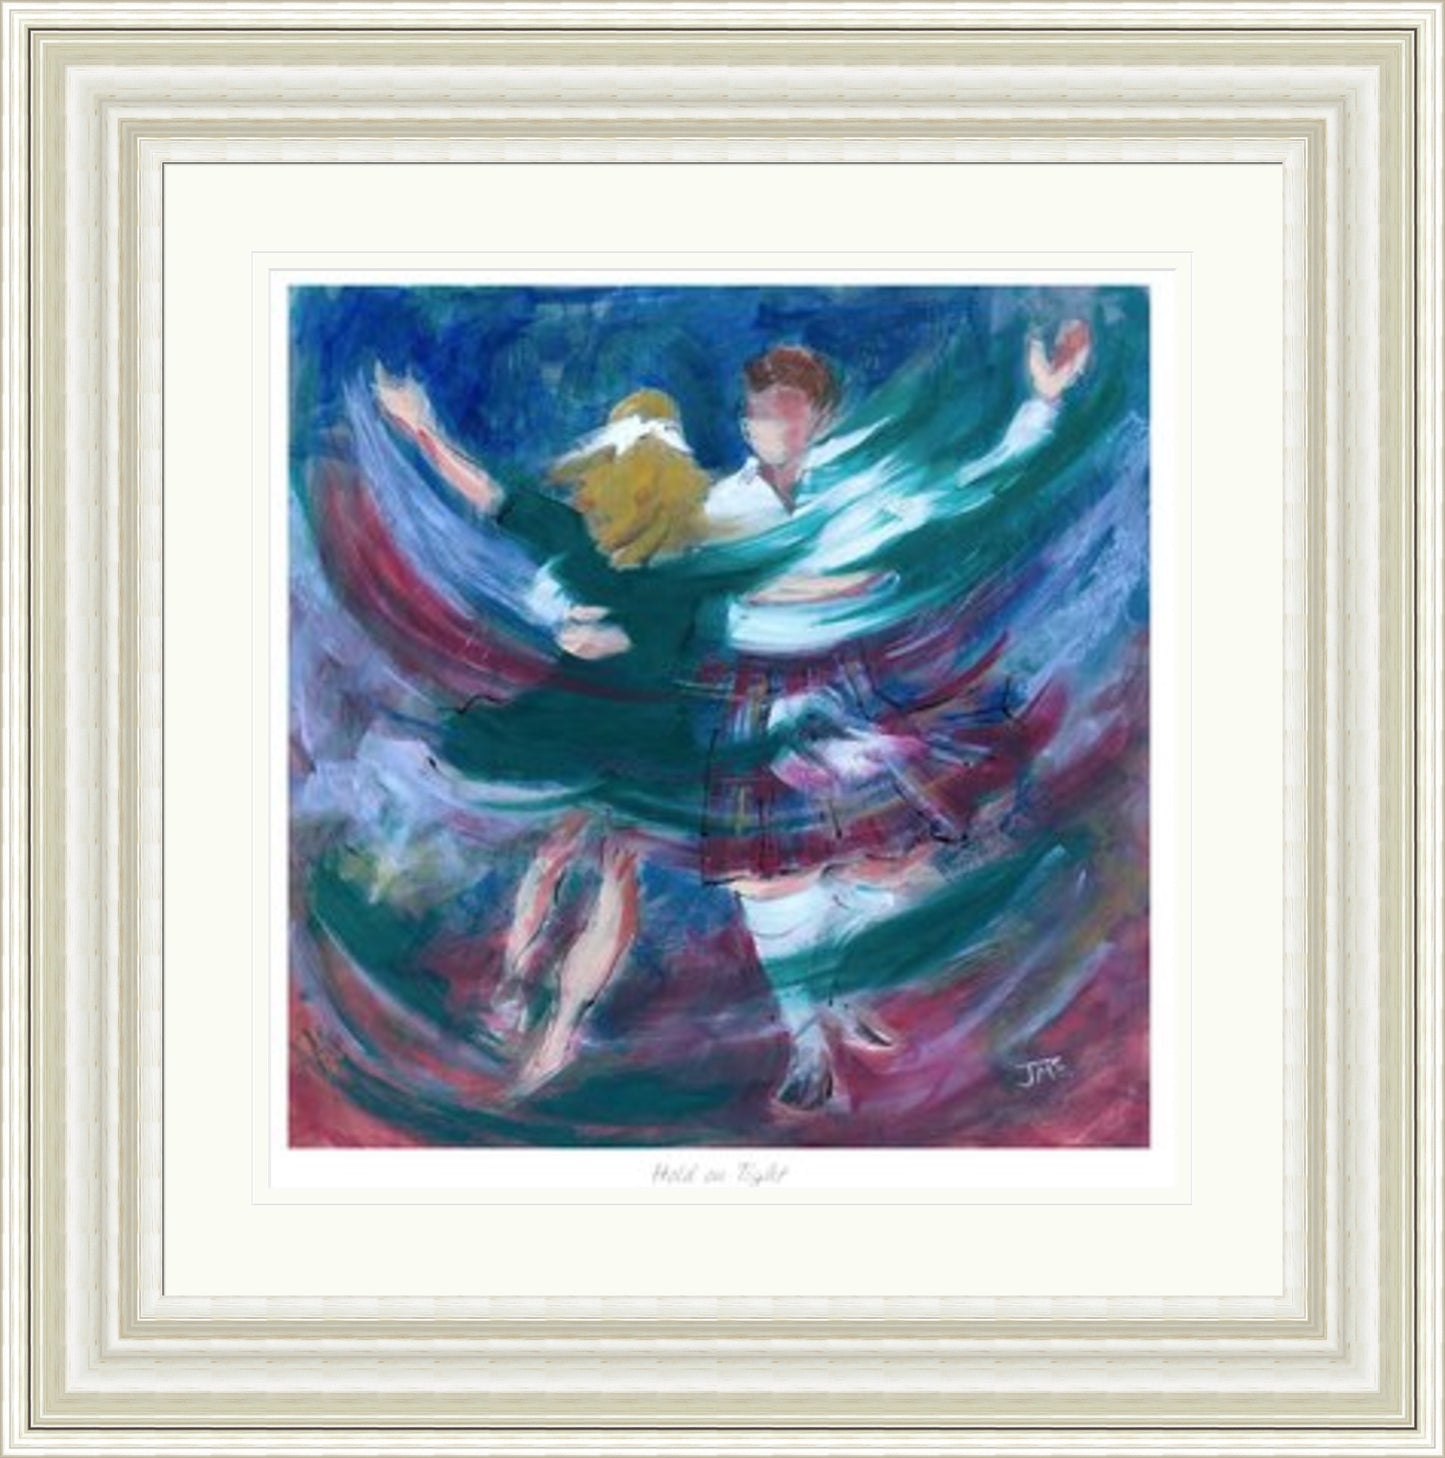 Hold on Tight Ceilidh Dancing Art Print by Janet McCrorie